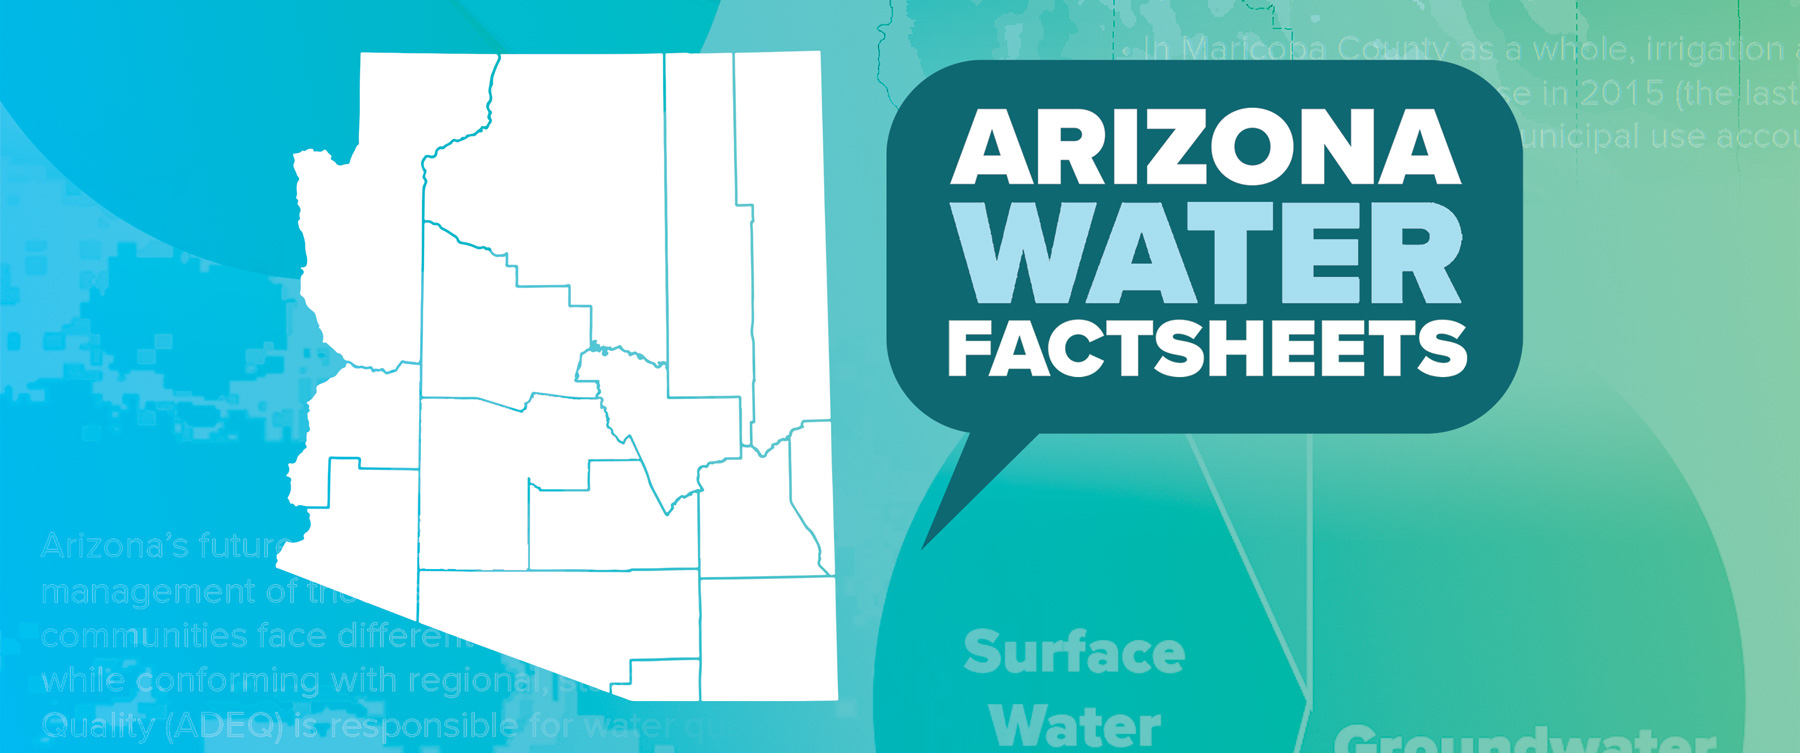 AZ water factsheets graphic showing state and a callout ballon with text